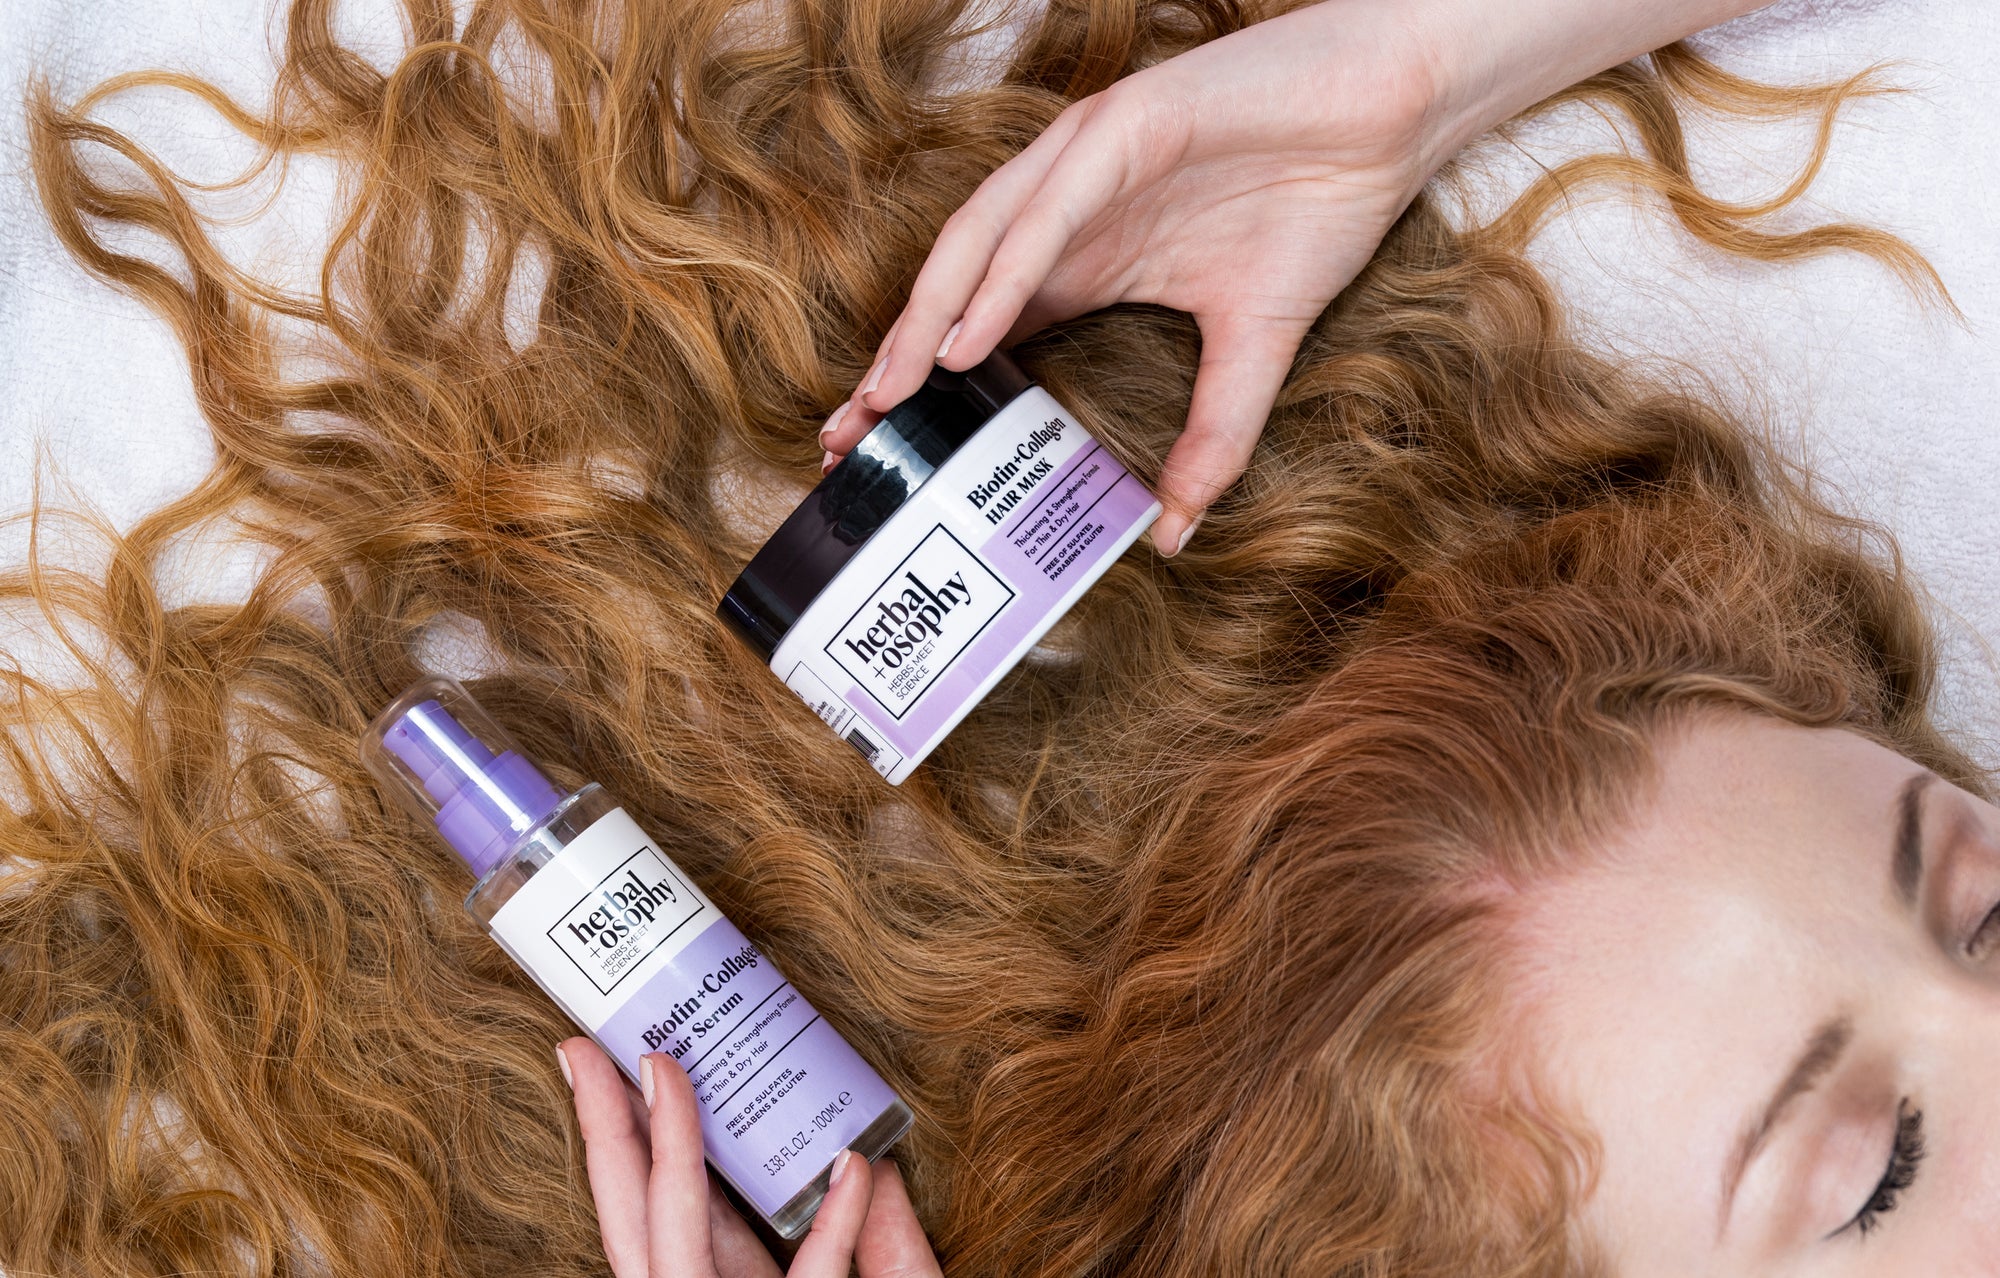 woman with long wavy hair holding Herbalosophy Biotin + Collagen serum and mask haircare products